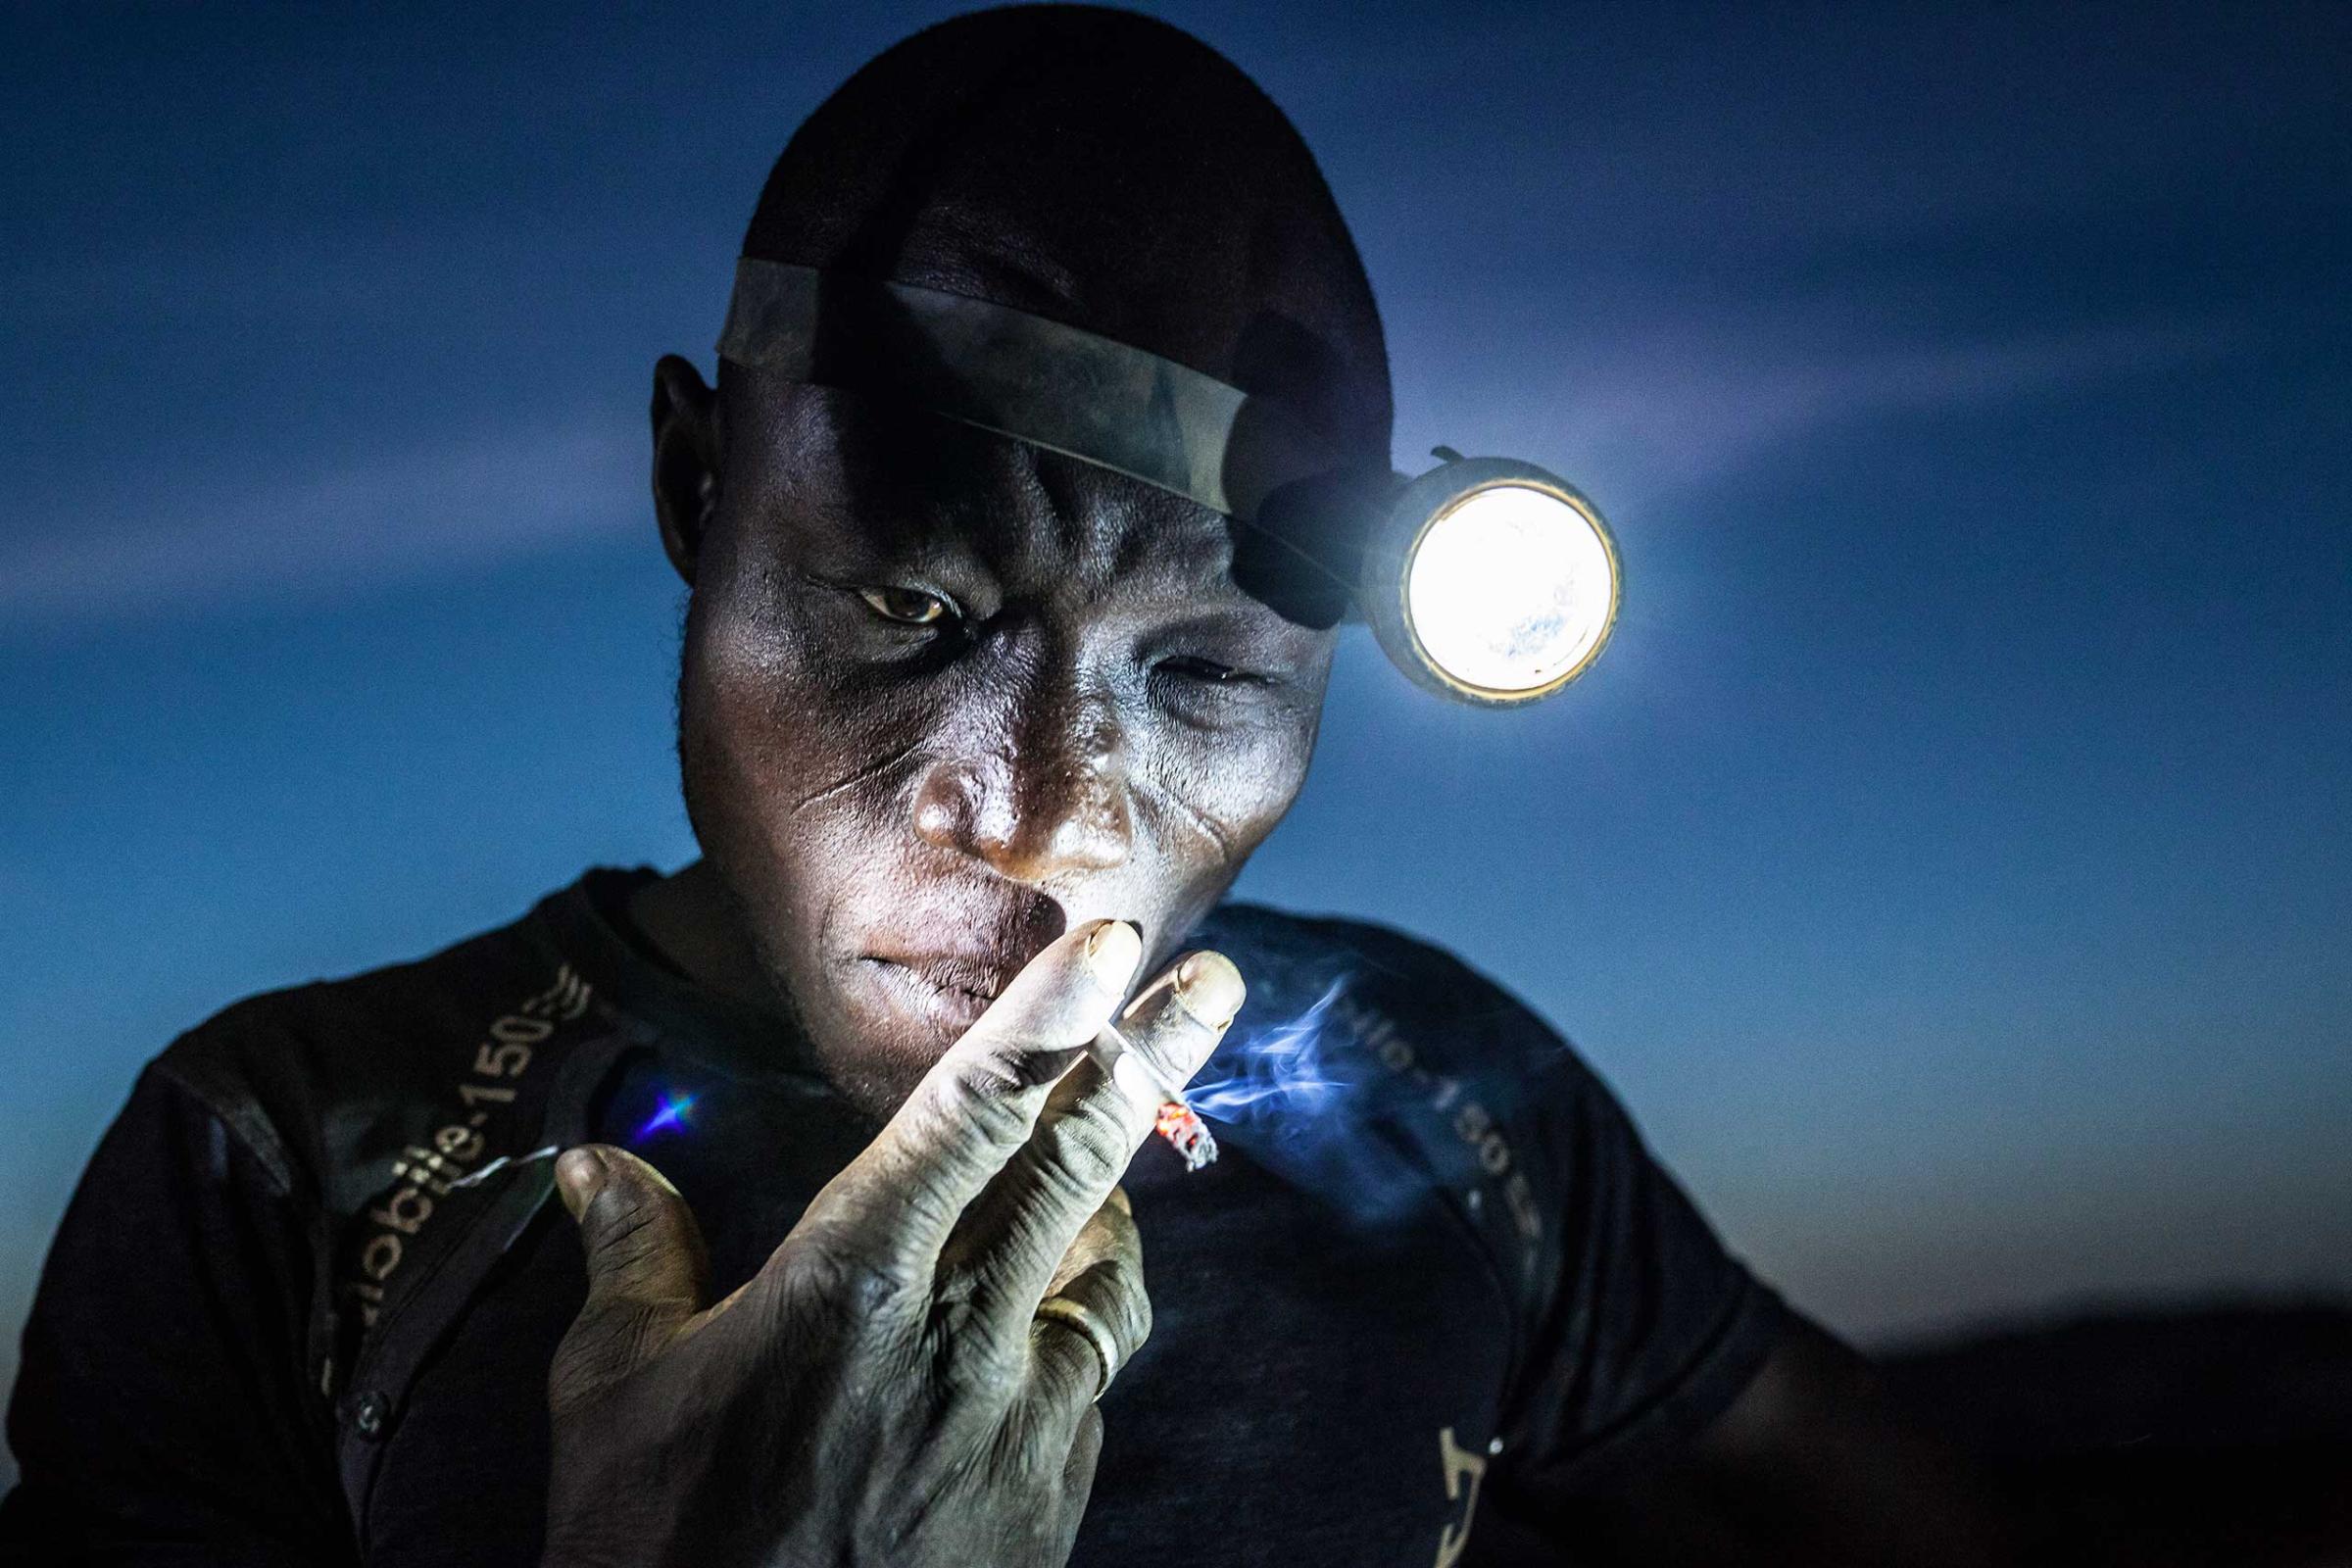 People, 2nd prize singles. A mine worker takes a smoke break before going back into the pit. Miners in Bani face harsh conditions and exposure to toxic chemicals and heavy metals. Image taken in Bani, Burkina Faso, on Nov. 20, 2015.